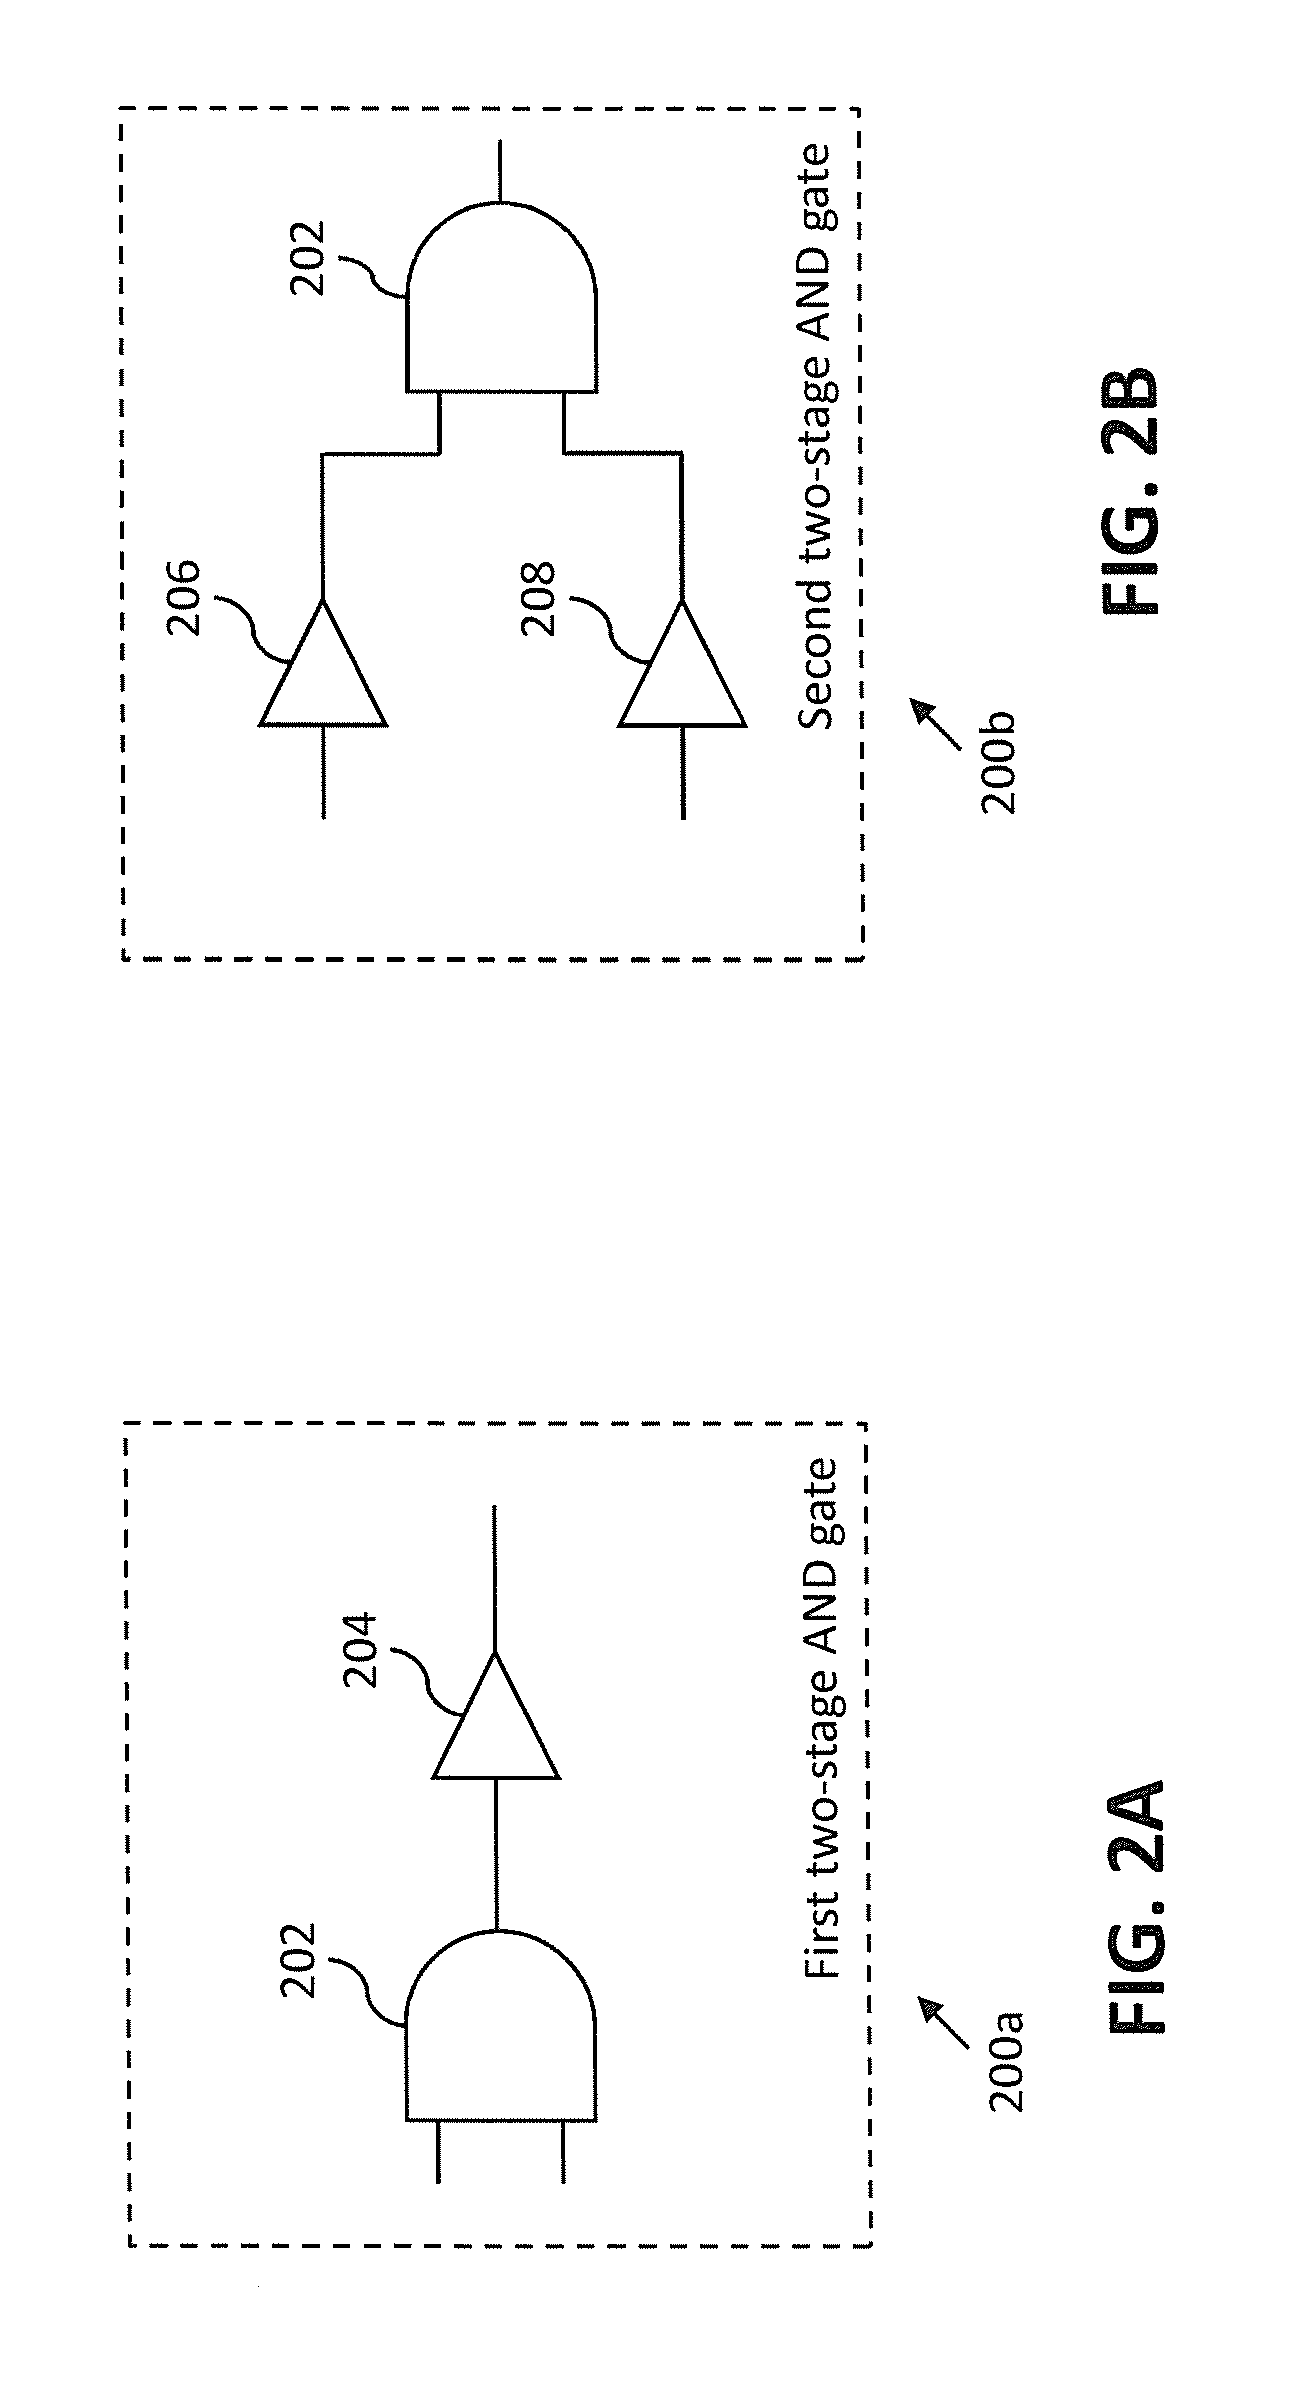 System for verifying timing constraints of IC design